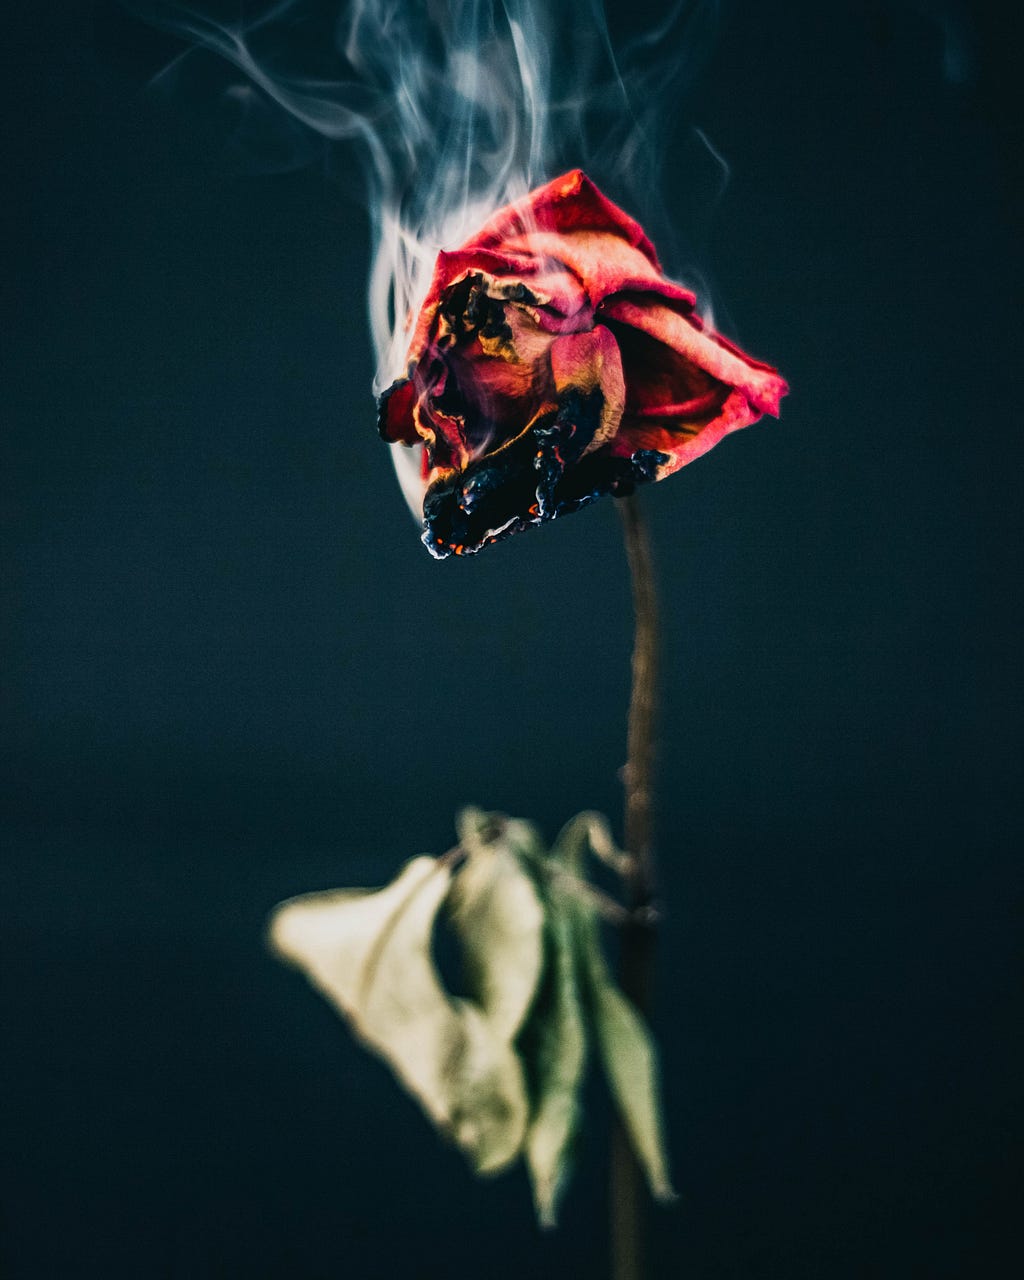 A solitary rose with its petals burning